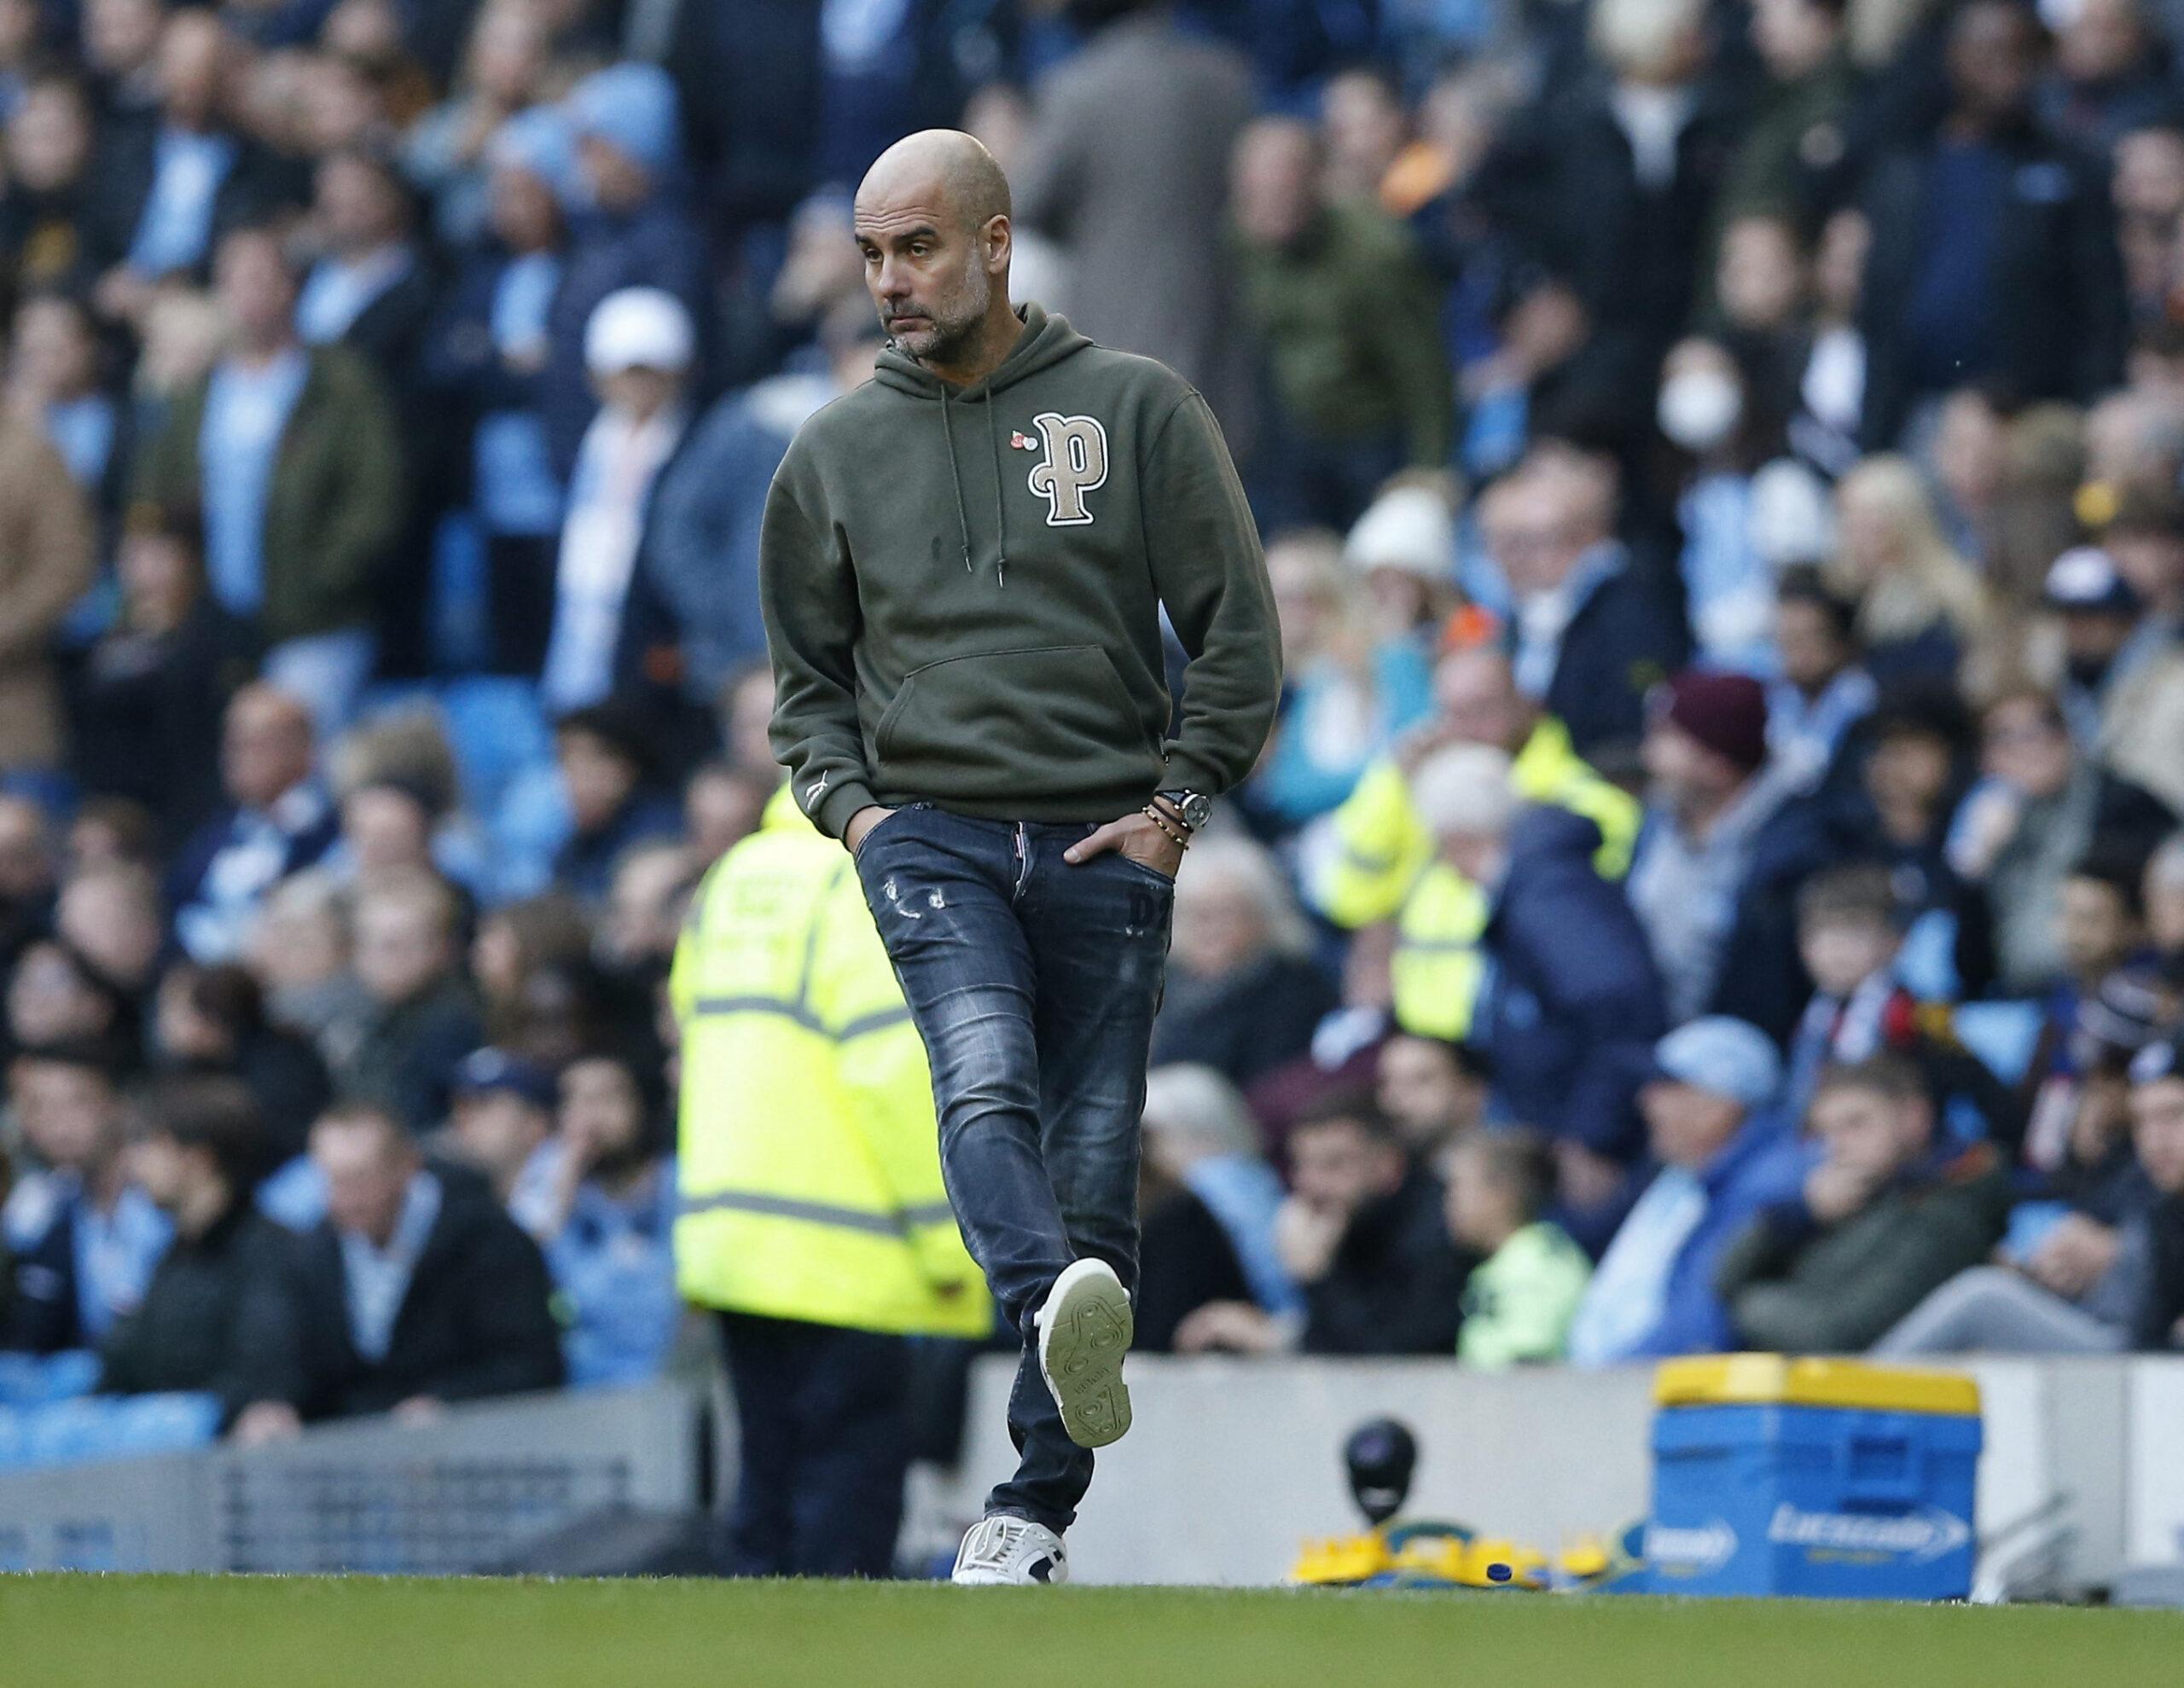 Guardiola extends contract at Manchester City to 2025